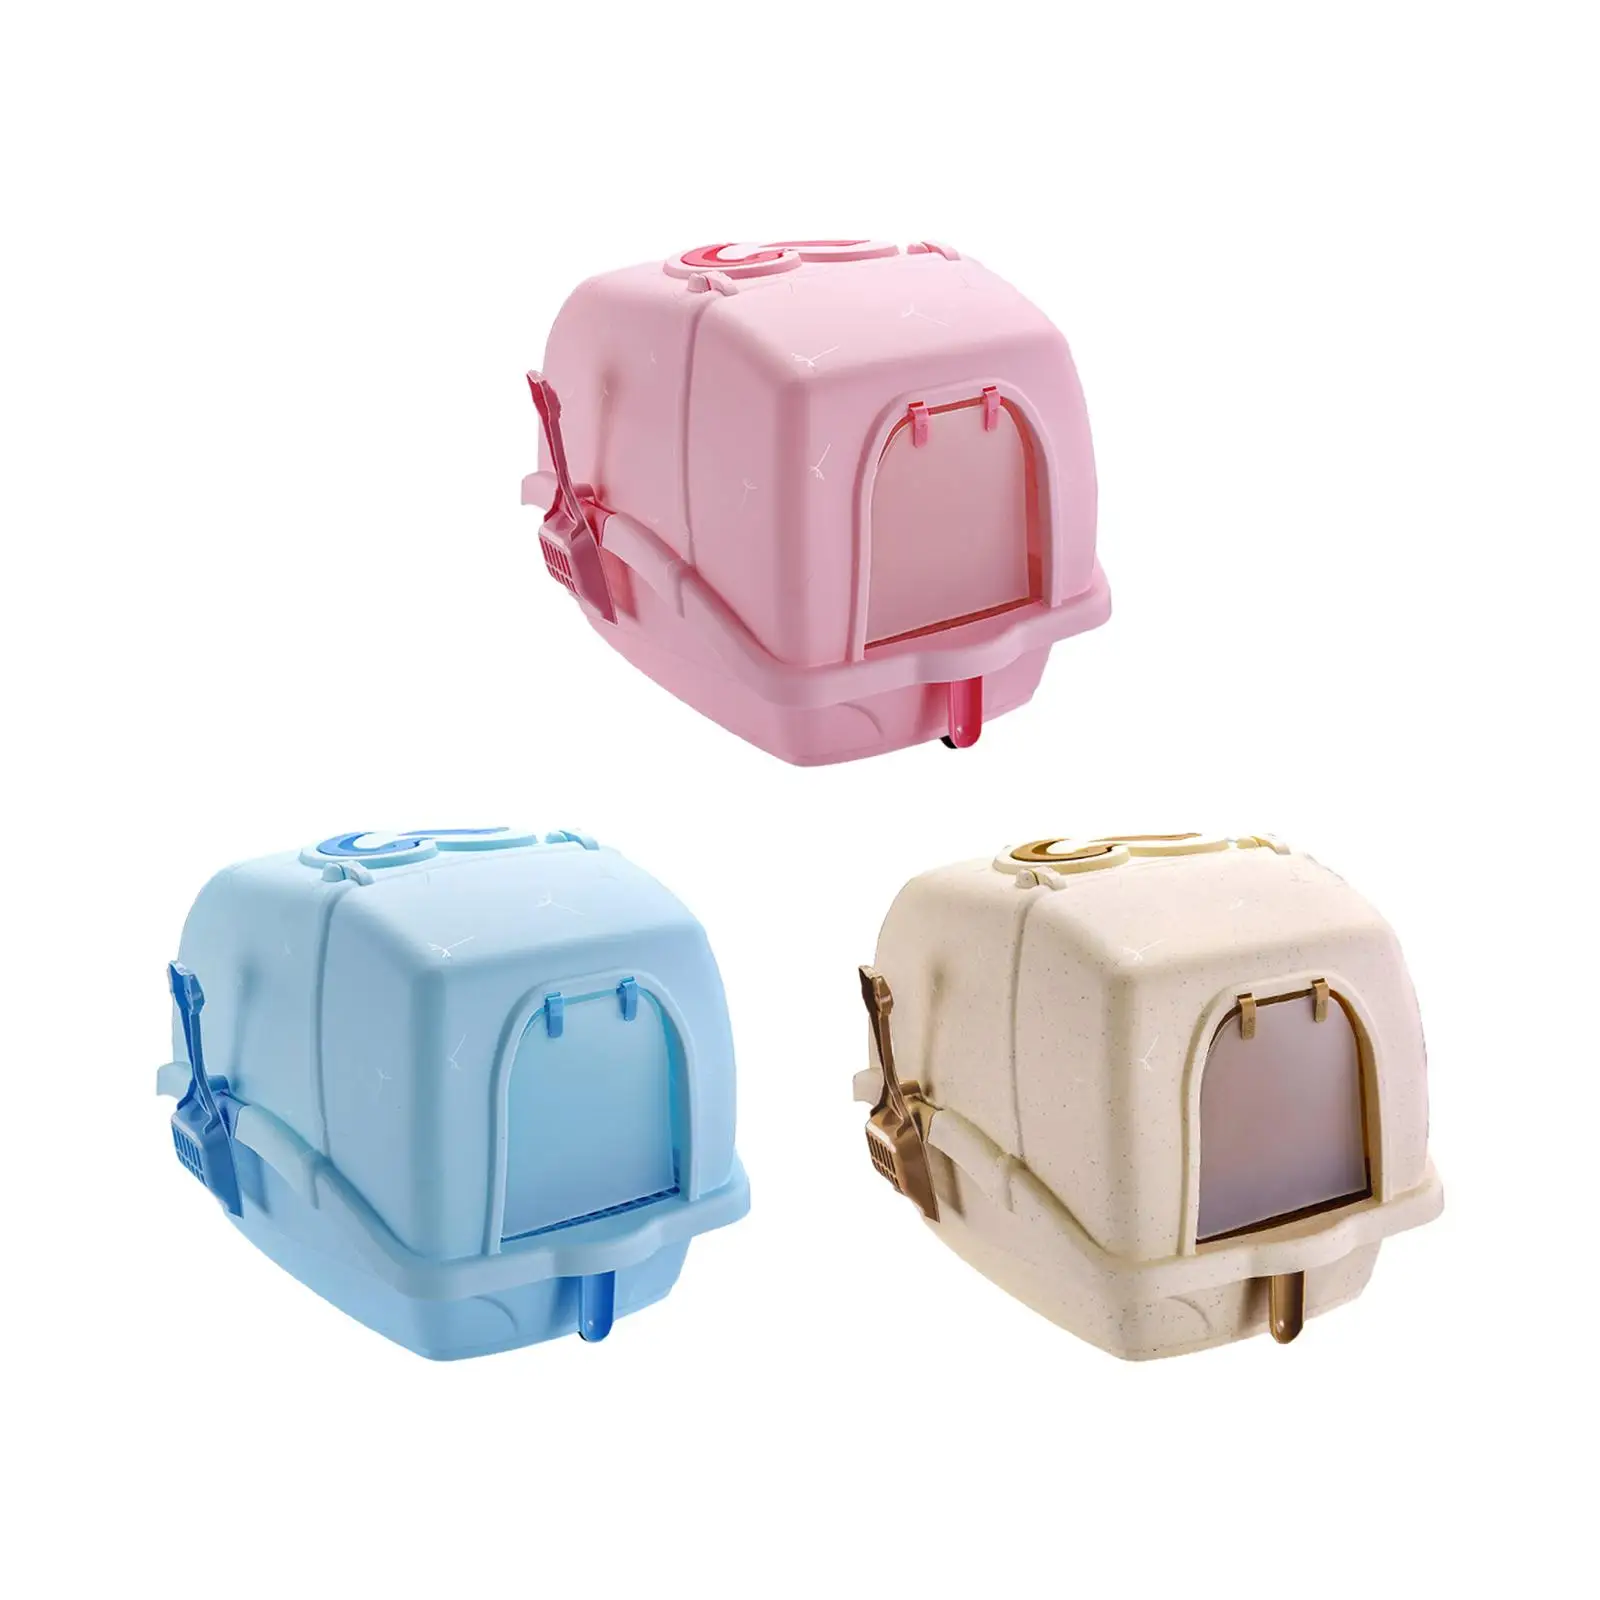 Fully Enclosed Cat Litter Box Pet Litter Tray Hollow Pedal Leakproof with Door Portable Pet Supplies with Handle Kitten Potty